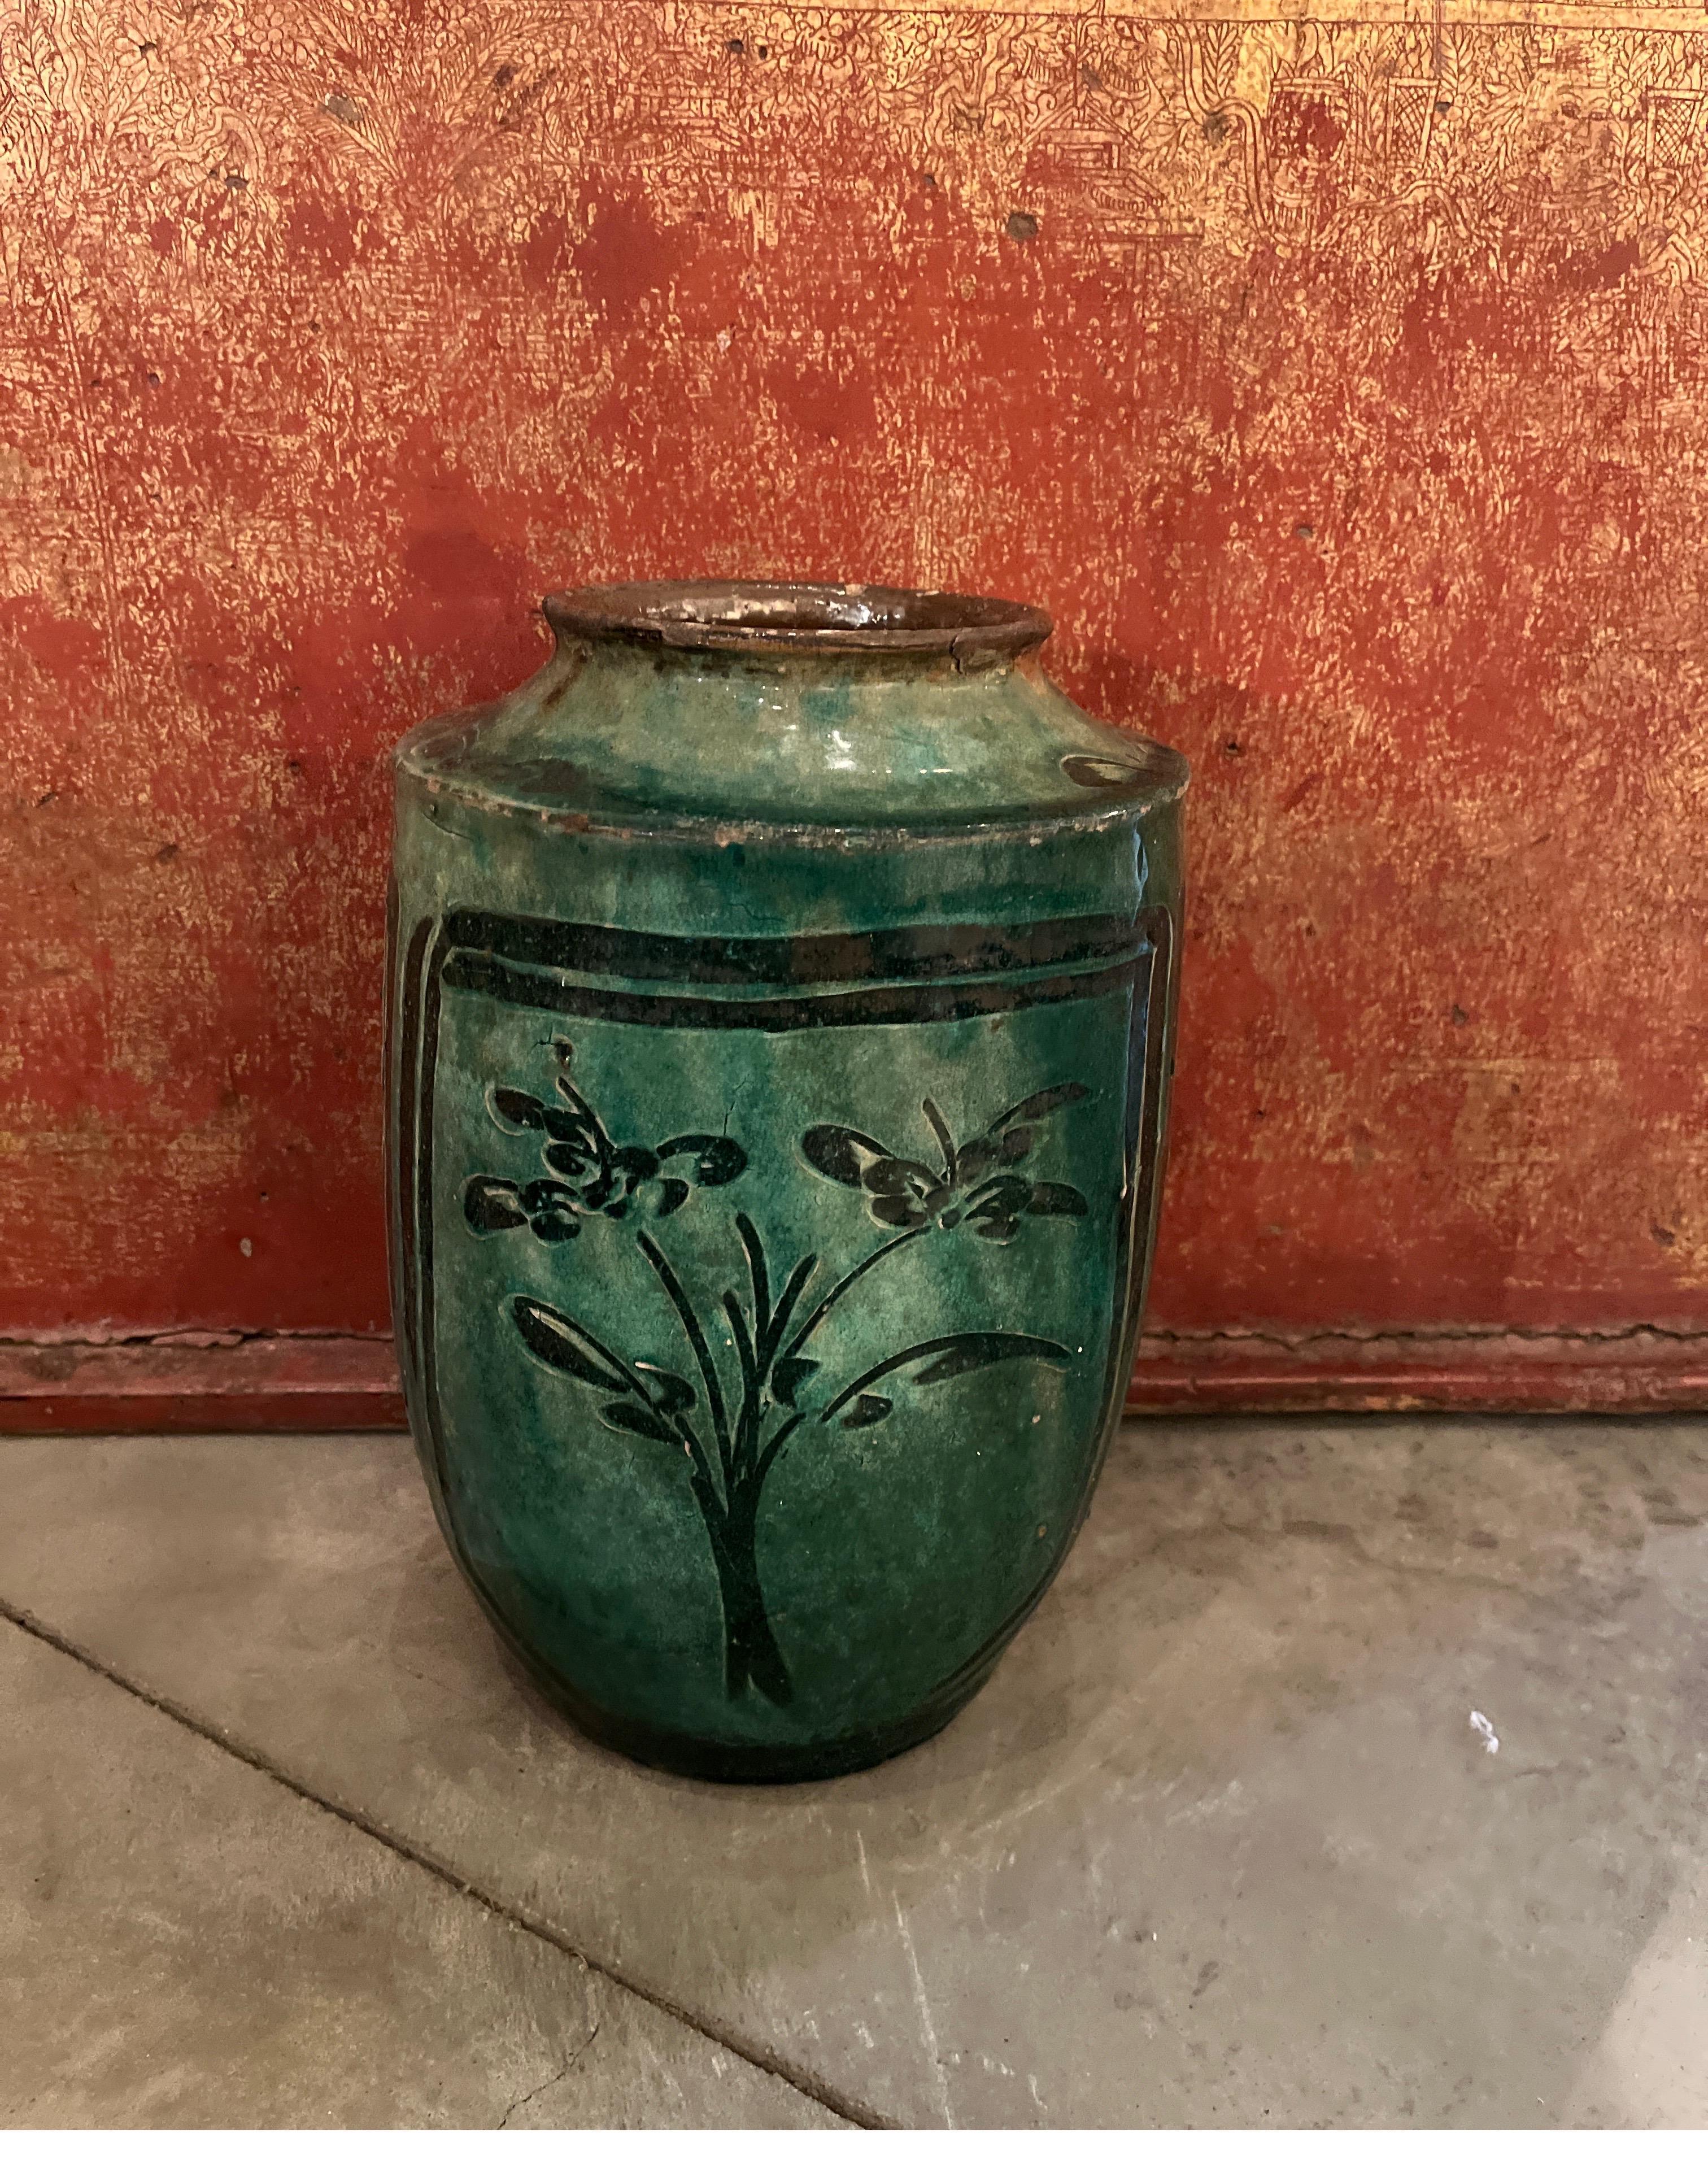 A stunning green glazed antique ceramic Chinese food jar with three fanciful and expertly hand painted floral images all around the vessel. This piece fairly glows with history and it's vibrant color. Remarkable glazes like this one are really not